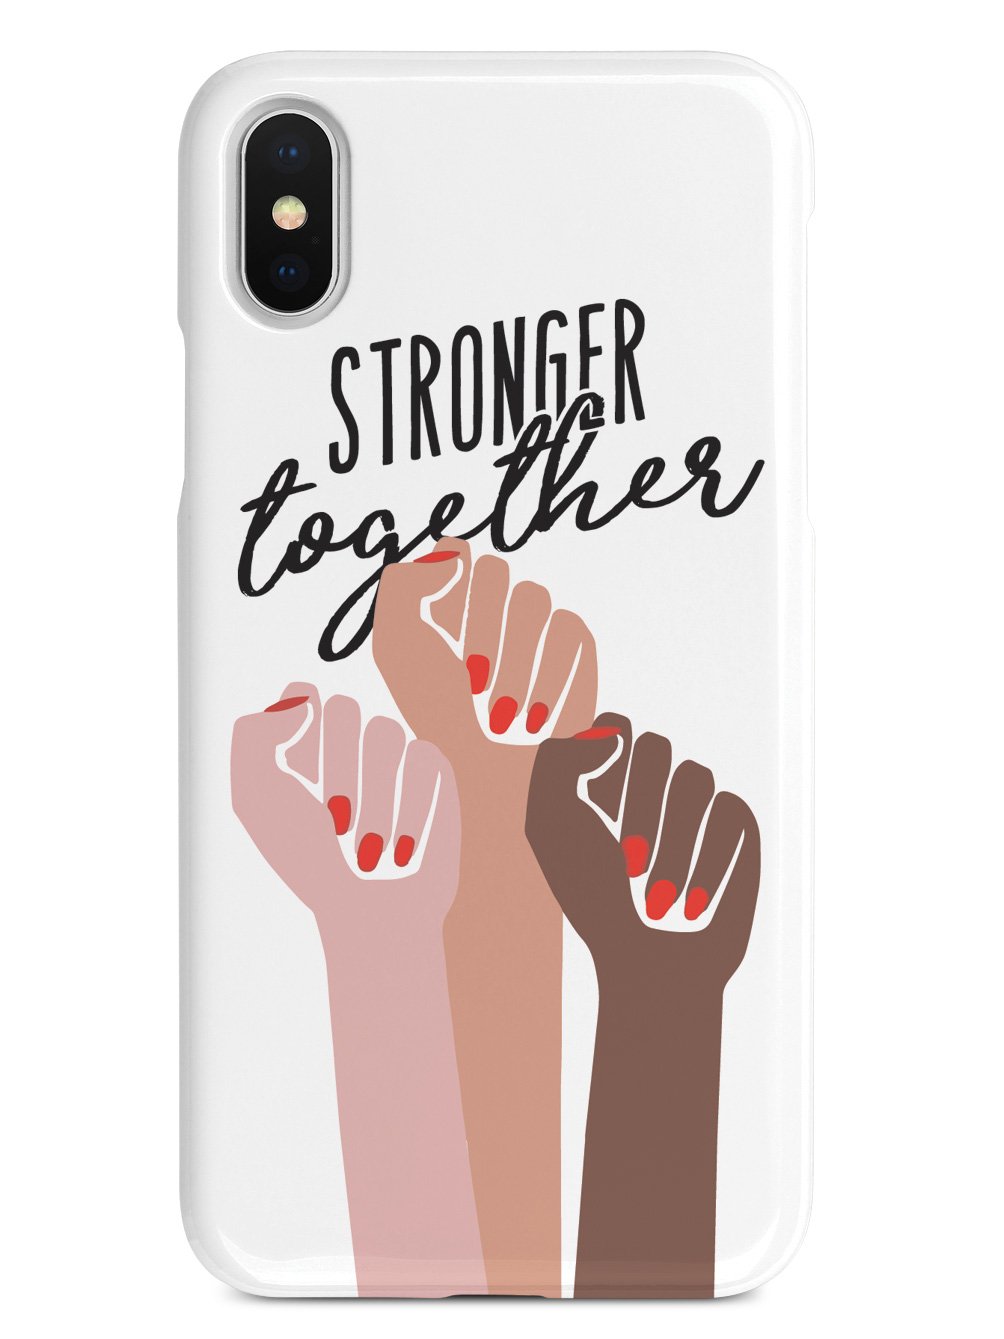 Stronger Together - Women's March Solidarity - White Case